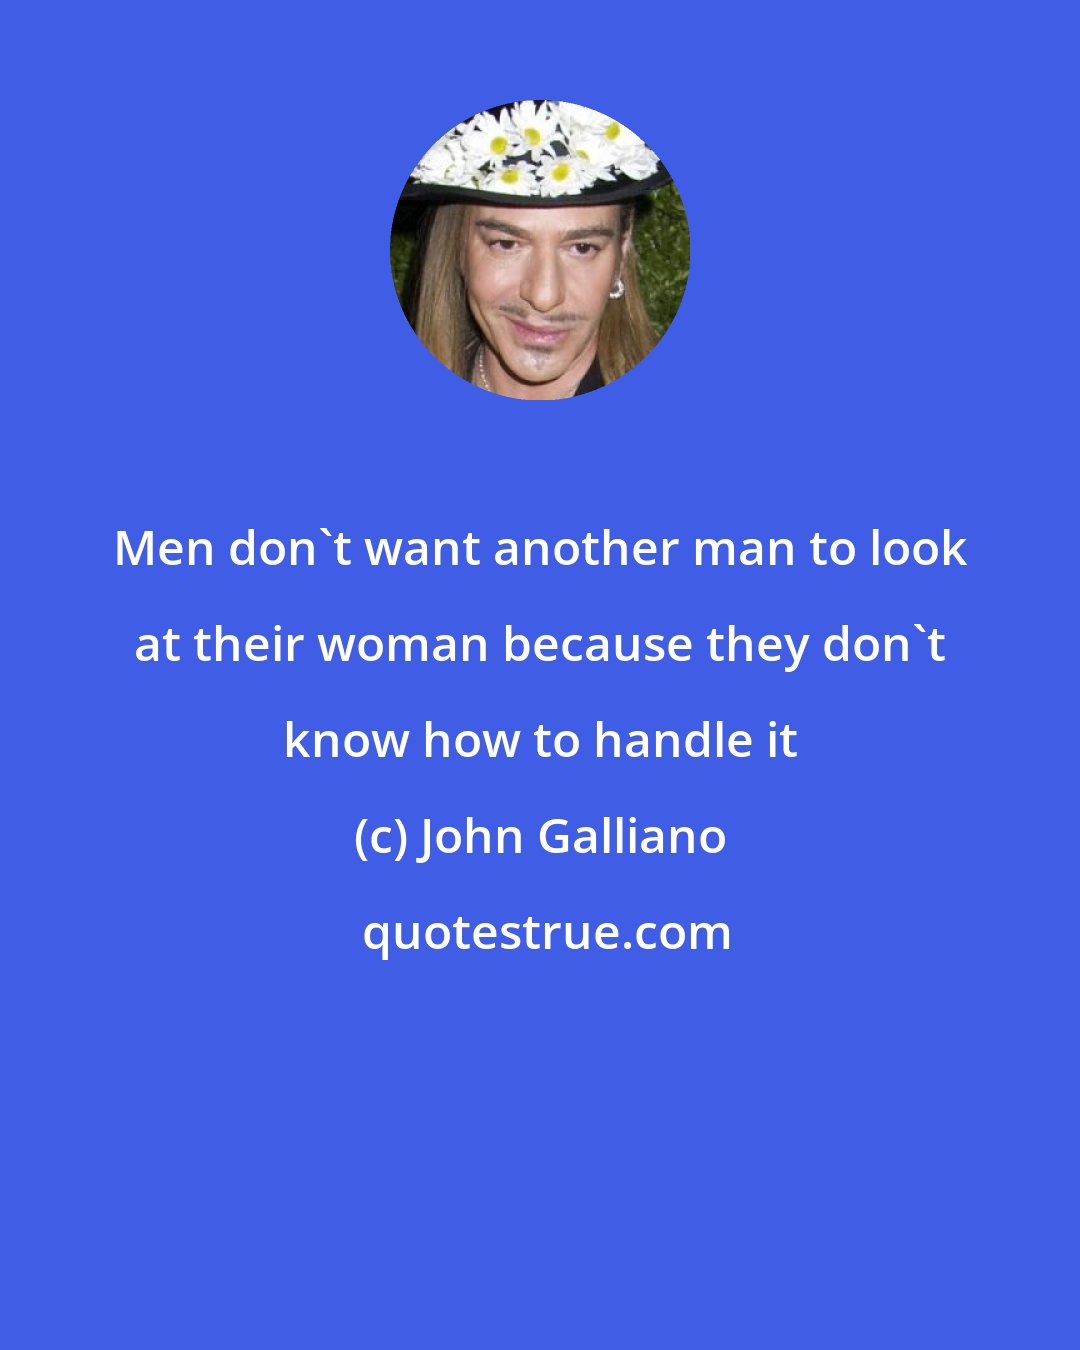 John Galliano: Men don't want another man to look at their woman because they don't know how to handle it